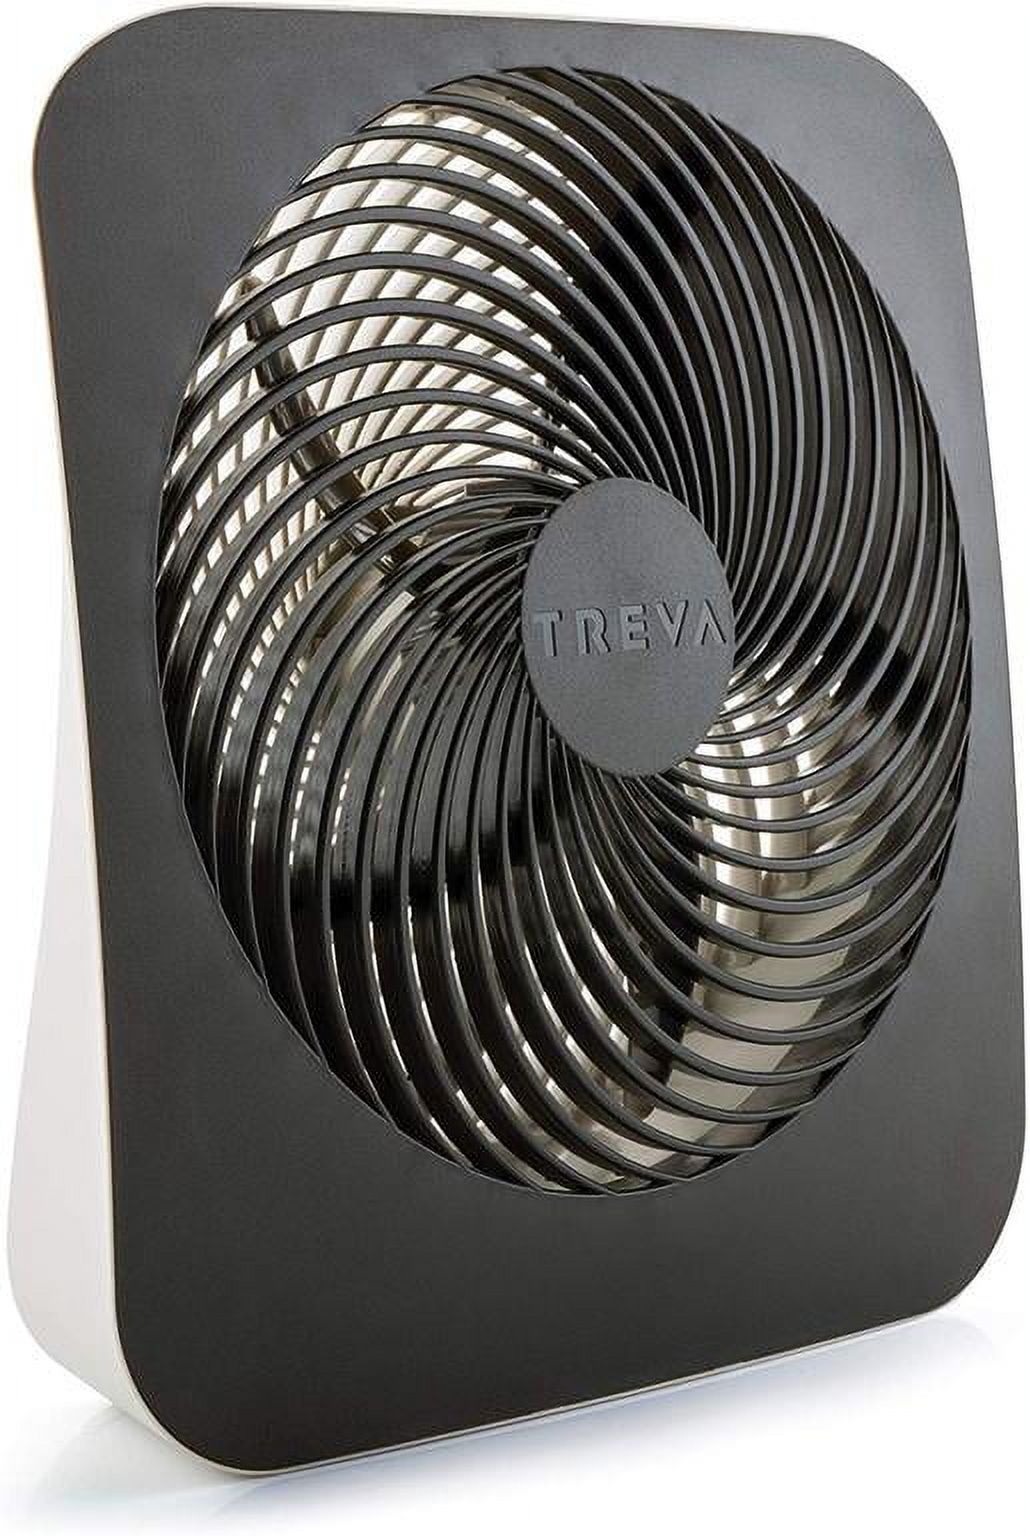 Treva 10 inch Battery Powered Portable 2 Speed Table Fan with Adapter, Black - image 1 of 6